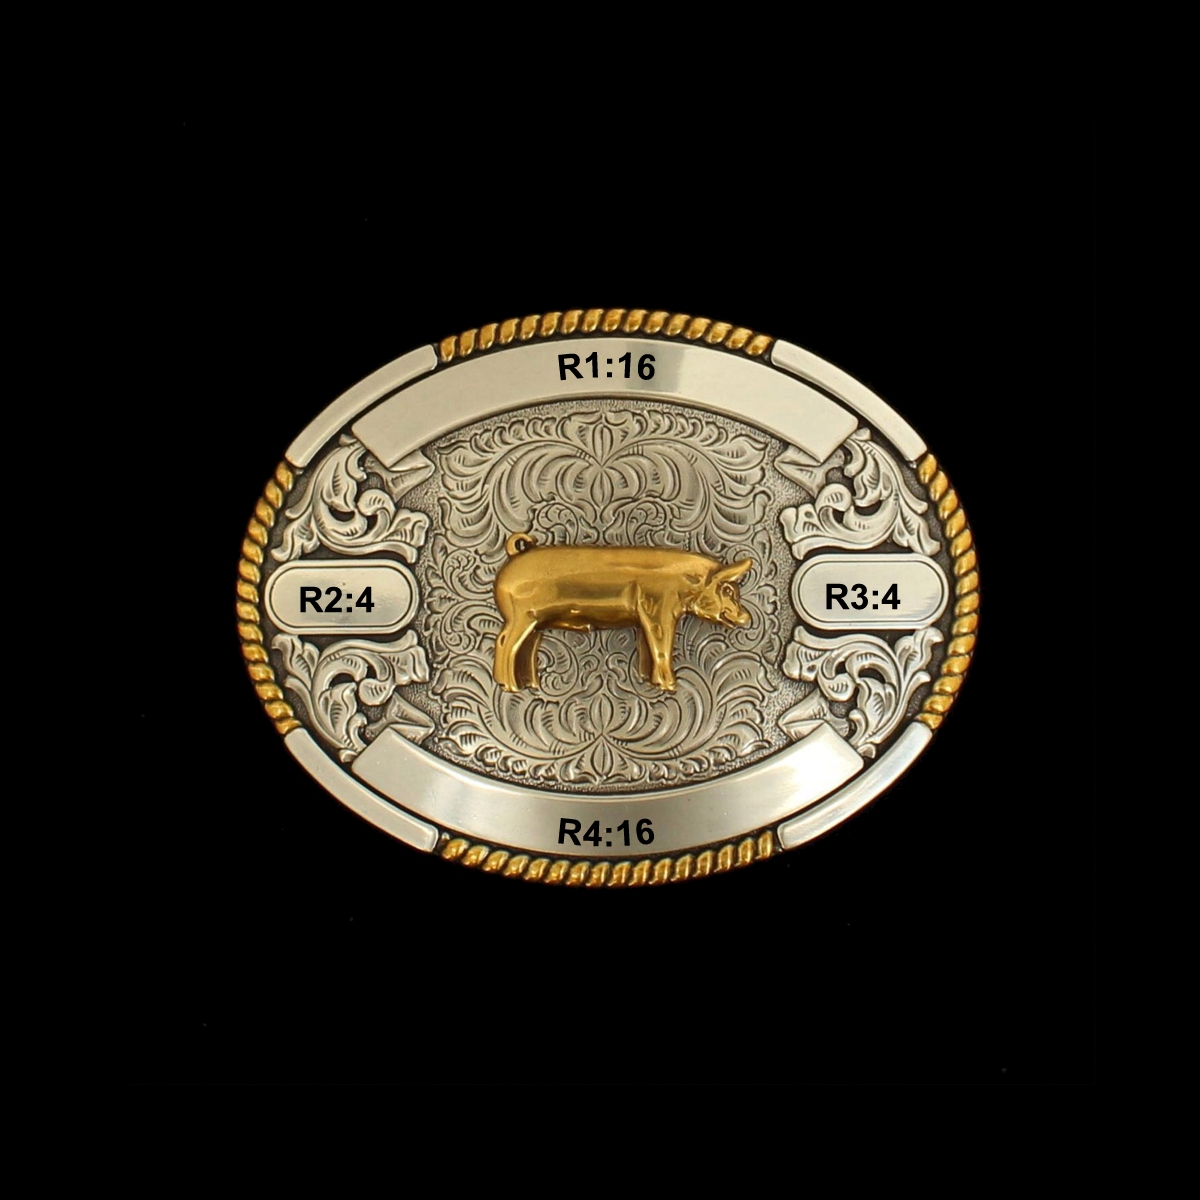 MF-38670 Trophy Buckle Oval Pig 4 Ribbons 2-7/8x3-3/4